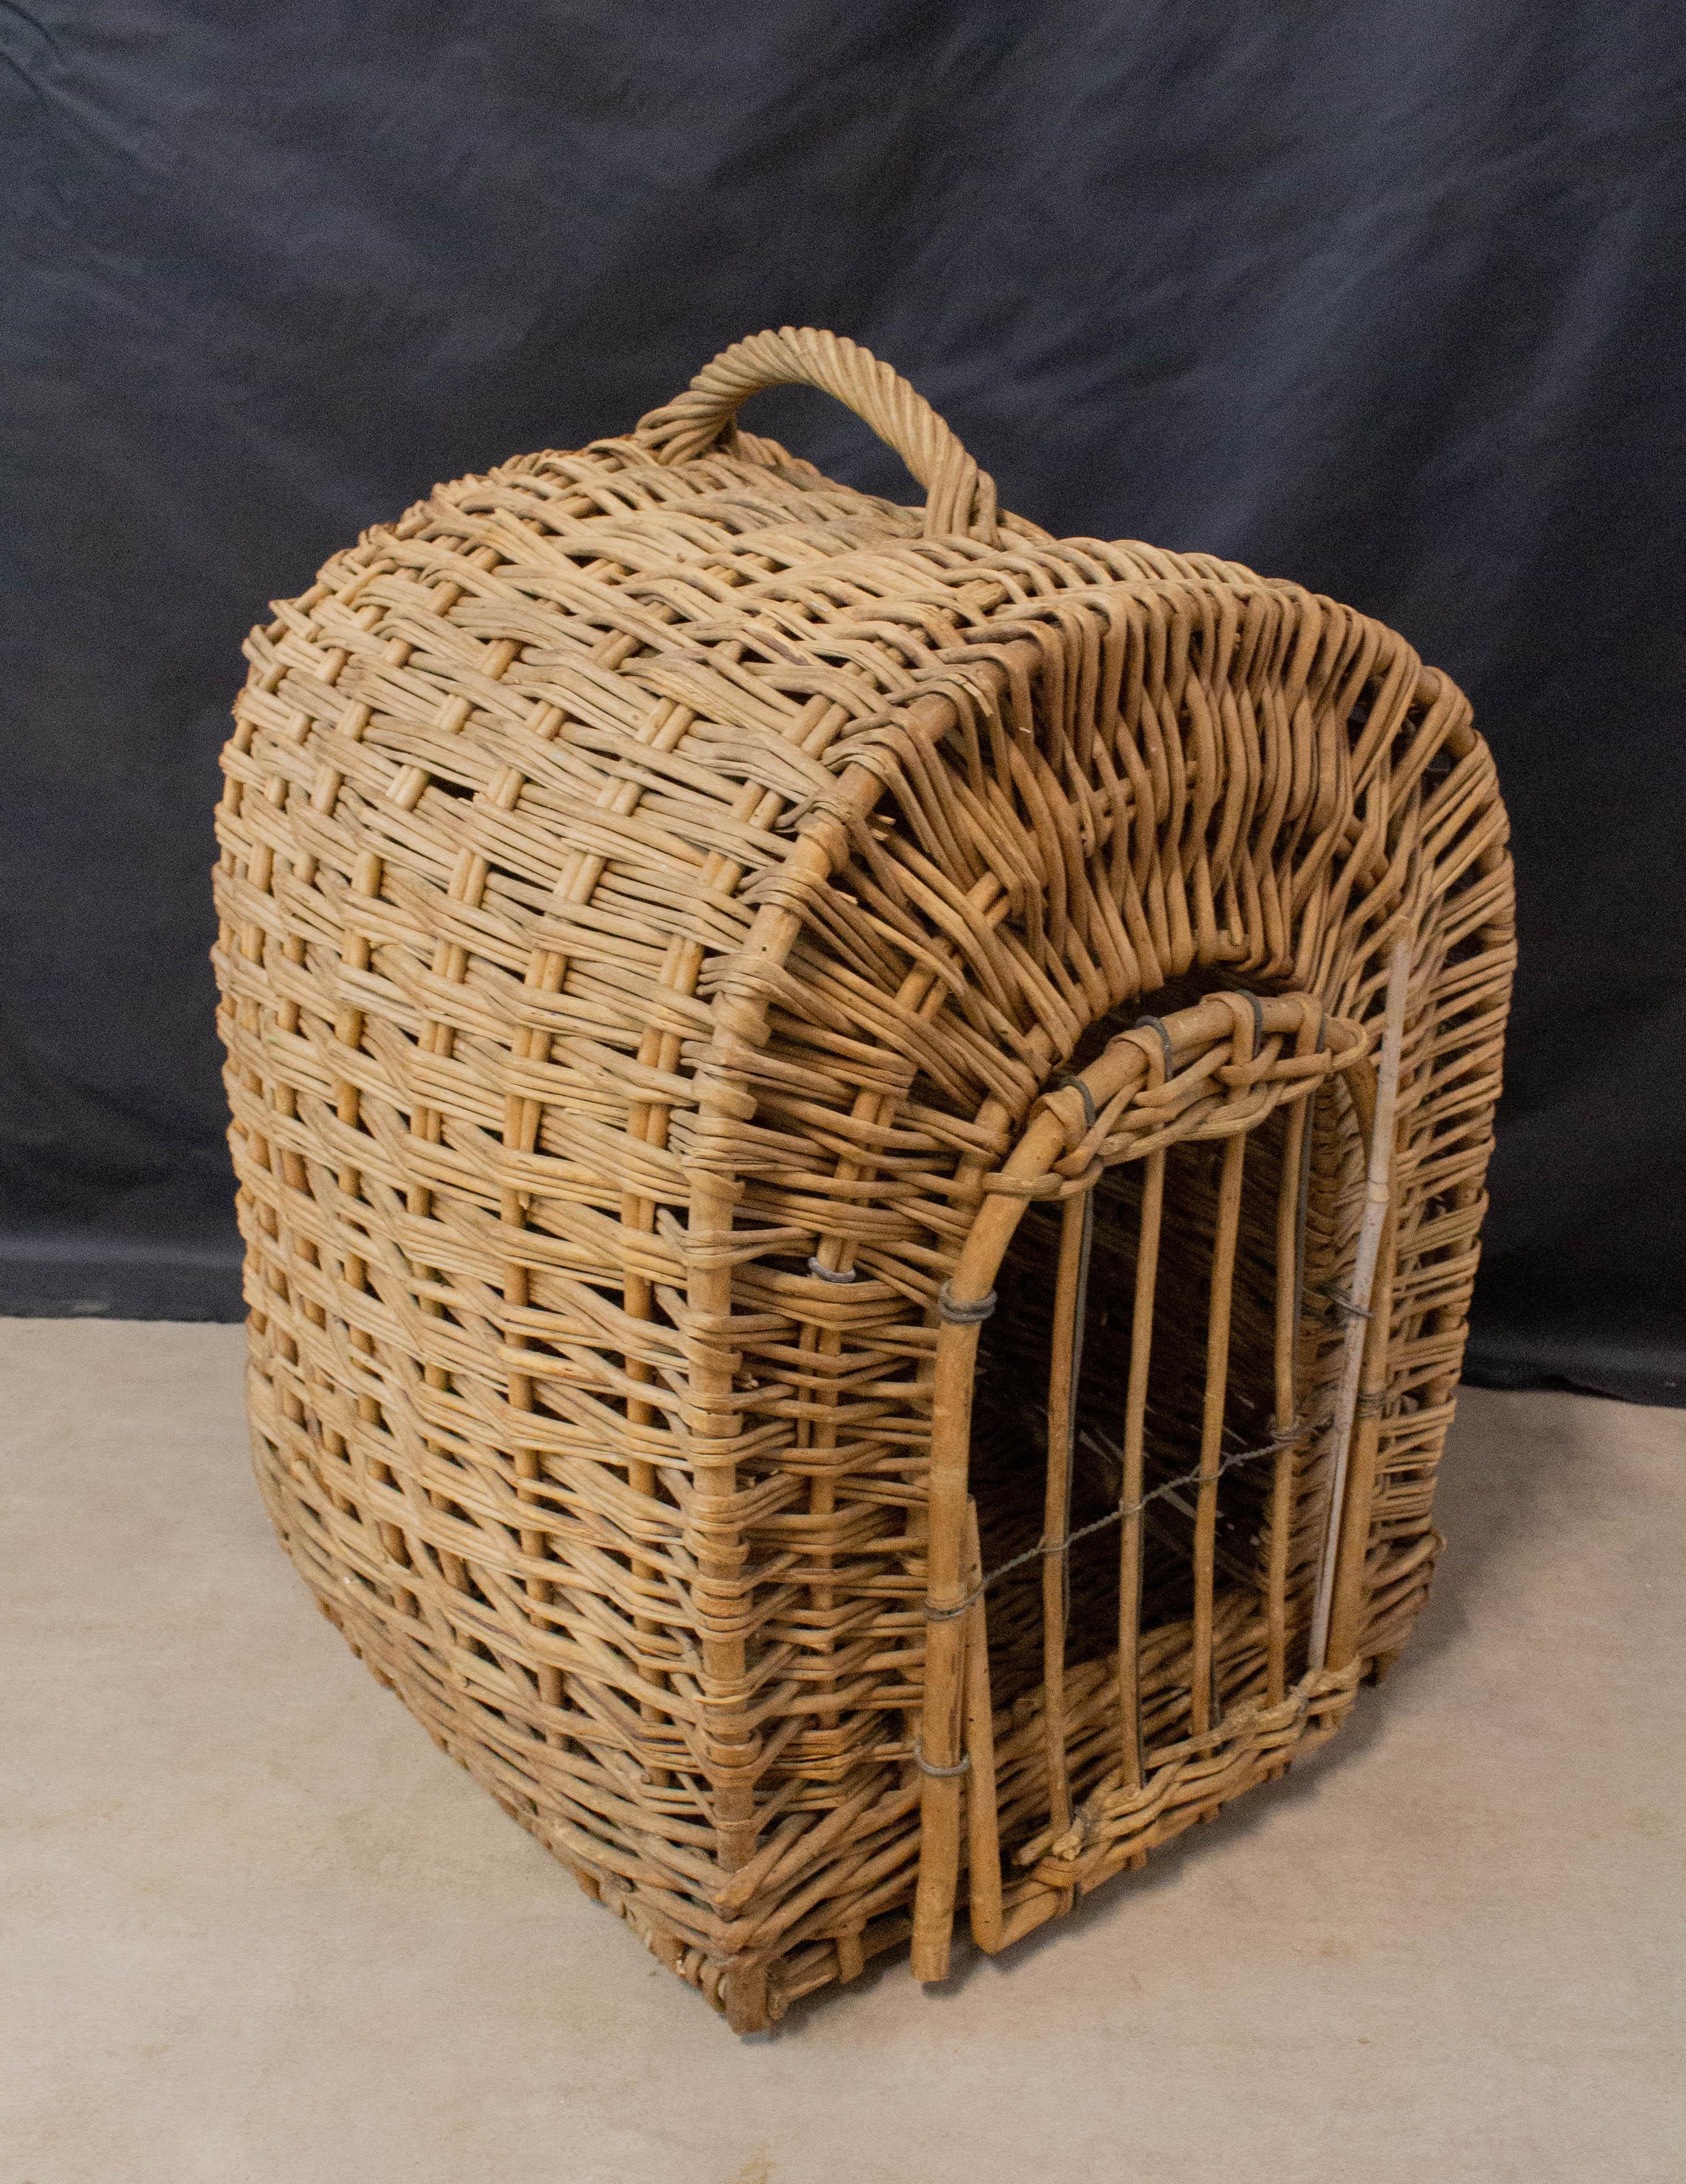 Transport wicker basket for cat or little dog circa 1950 
Mid-century France
Door opening measures: 25x15cm
Wicker and wire door,
Good condition.
 
For shipping:
43x35x48cm 1.6kg